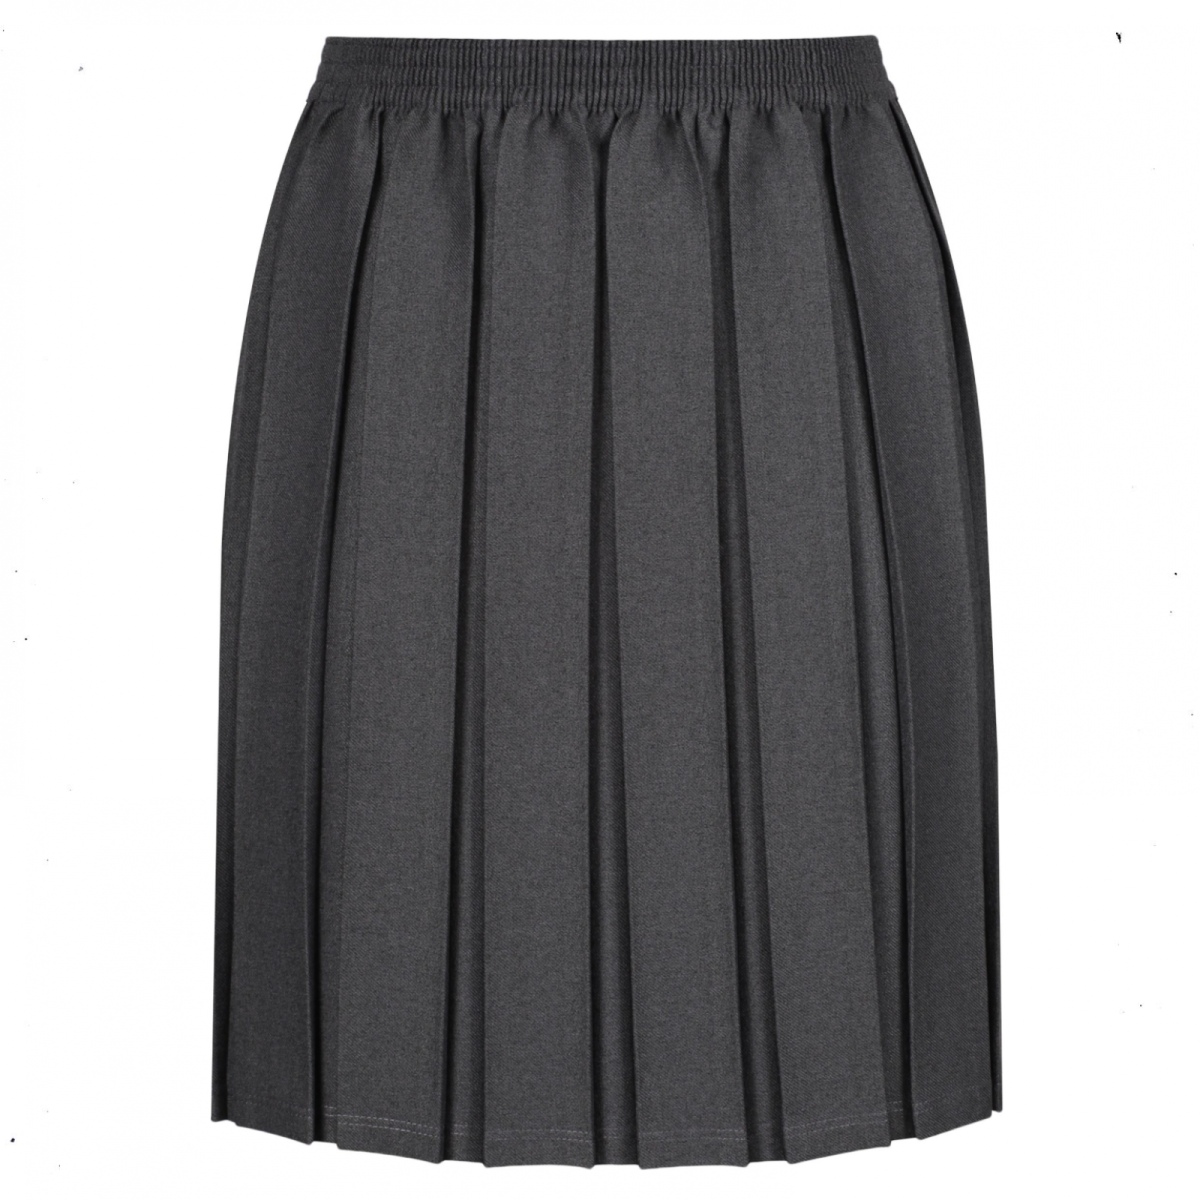 [EKM-AUTOGENERATED]Girls Grey Pleated Skirt - Forsters School ...